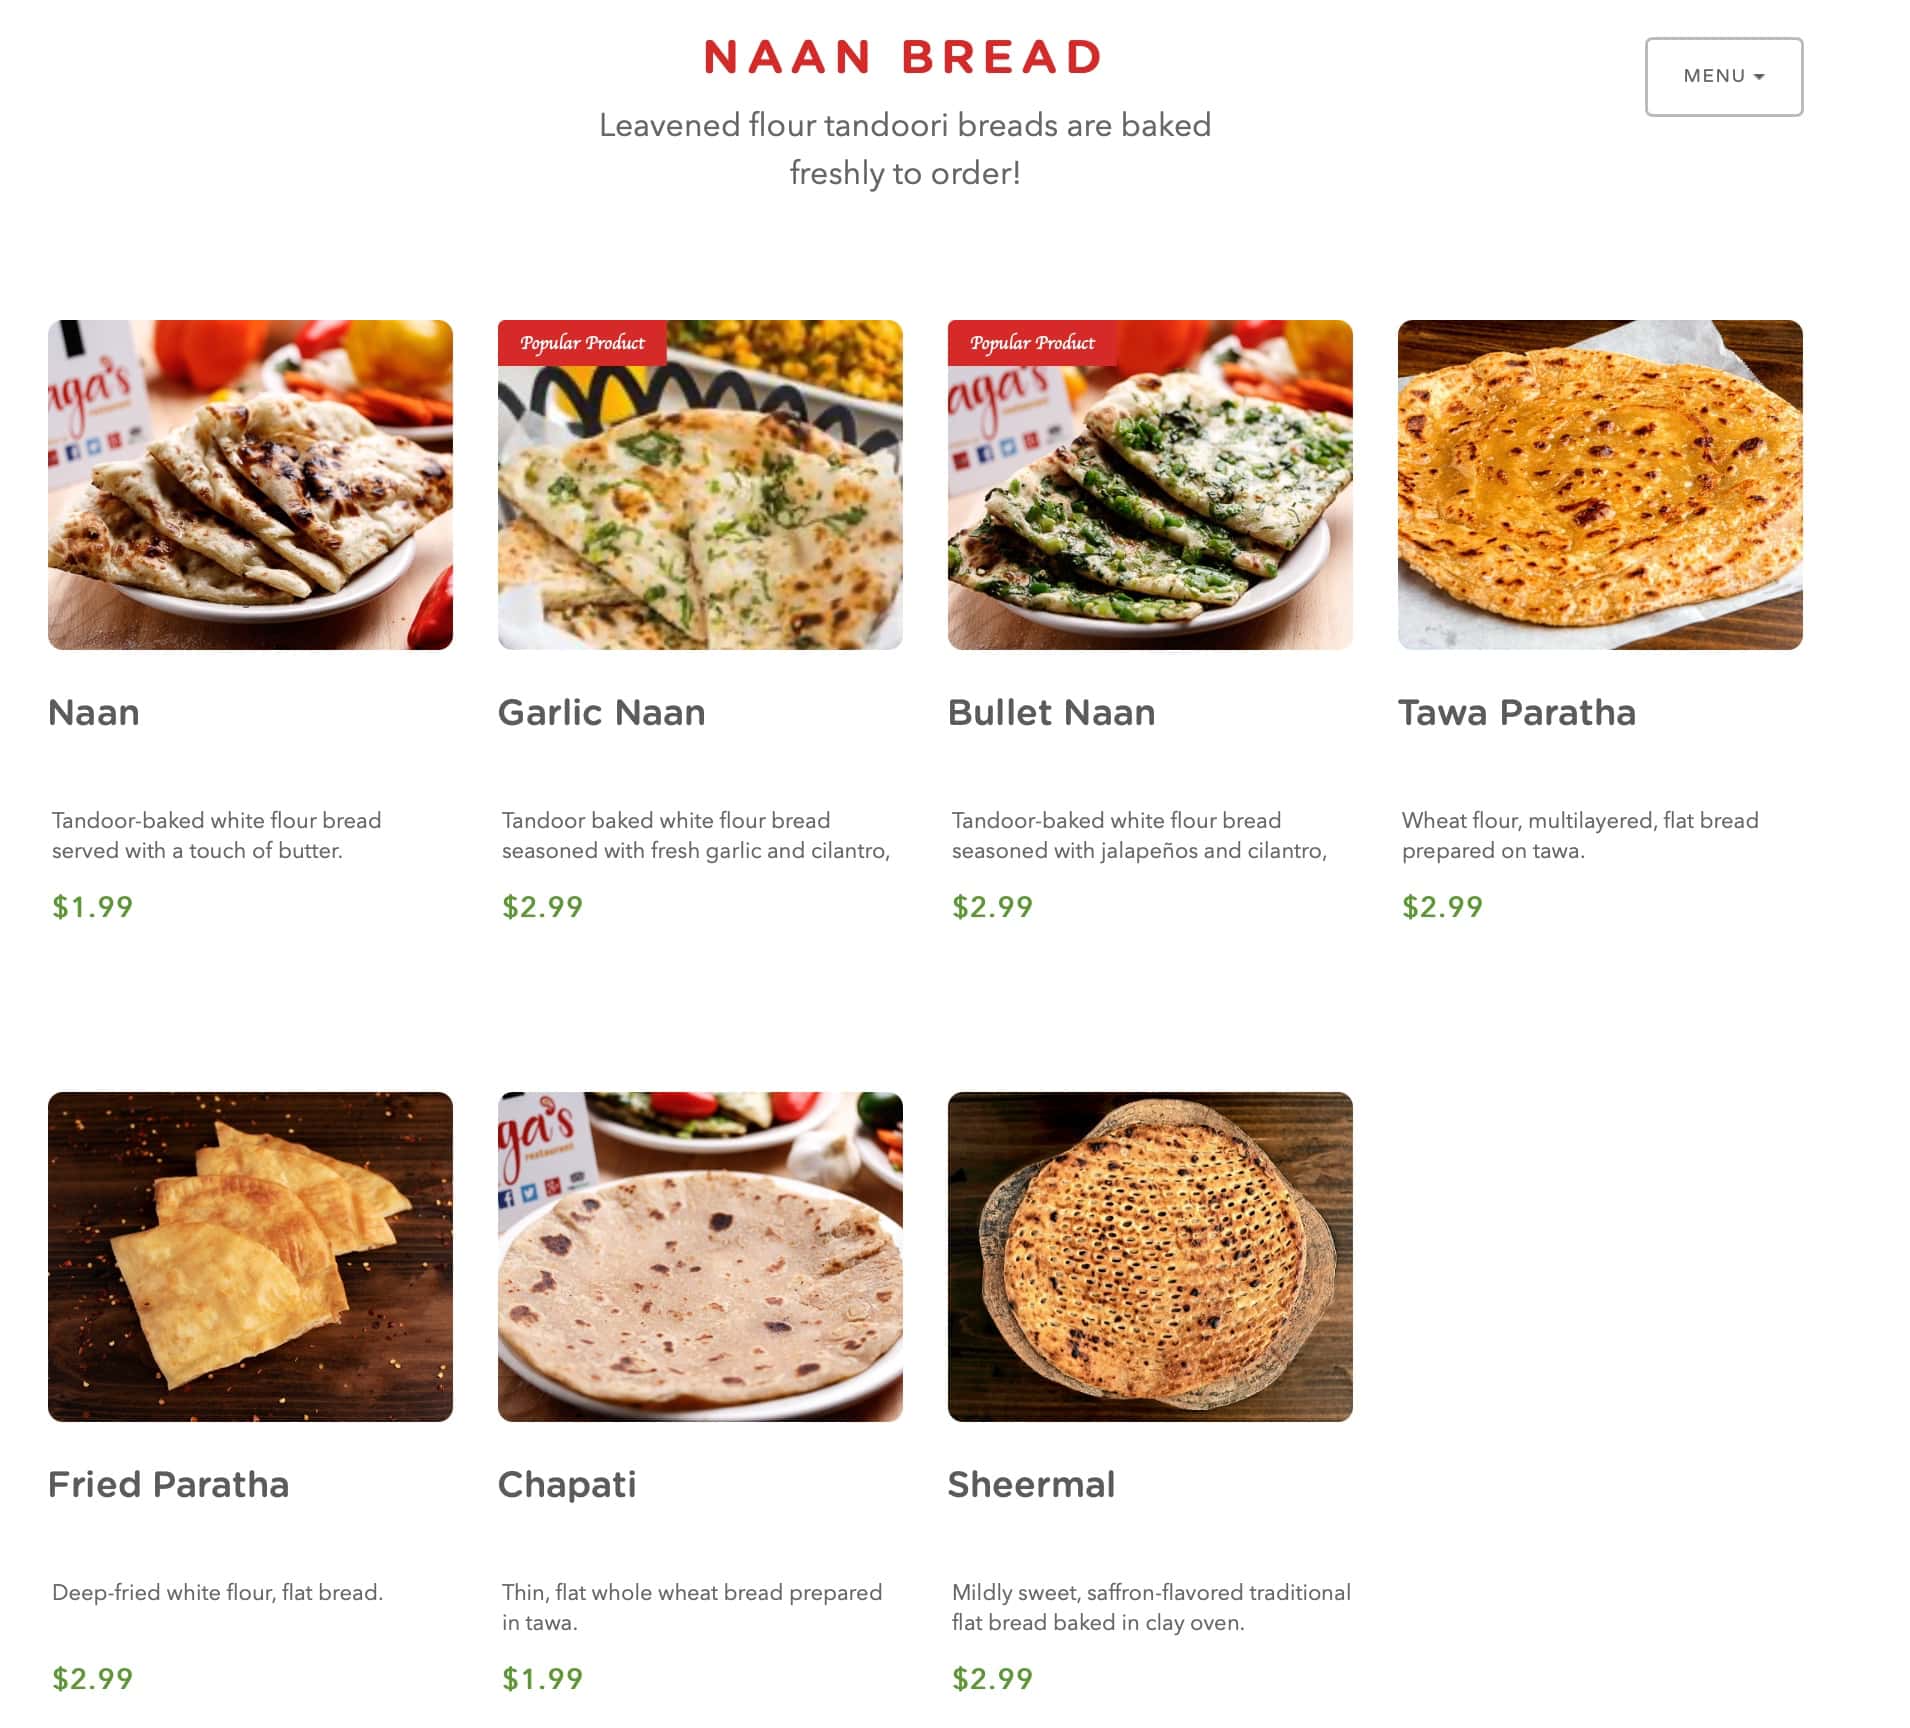 Aga's Restaurant and Catering Naan Bread Menu